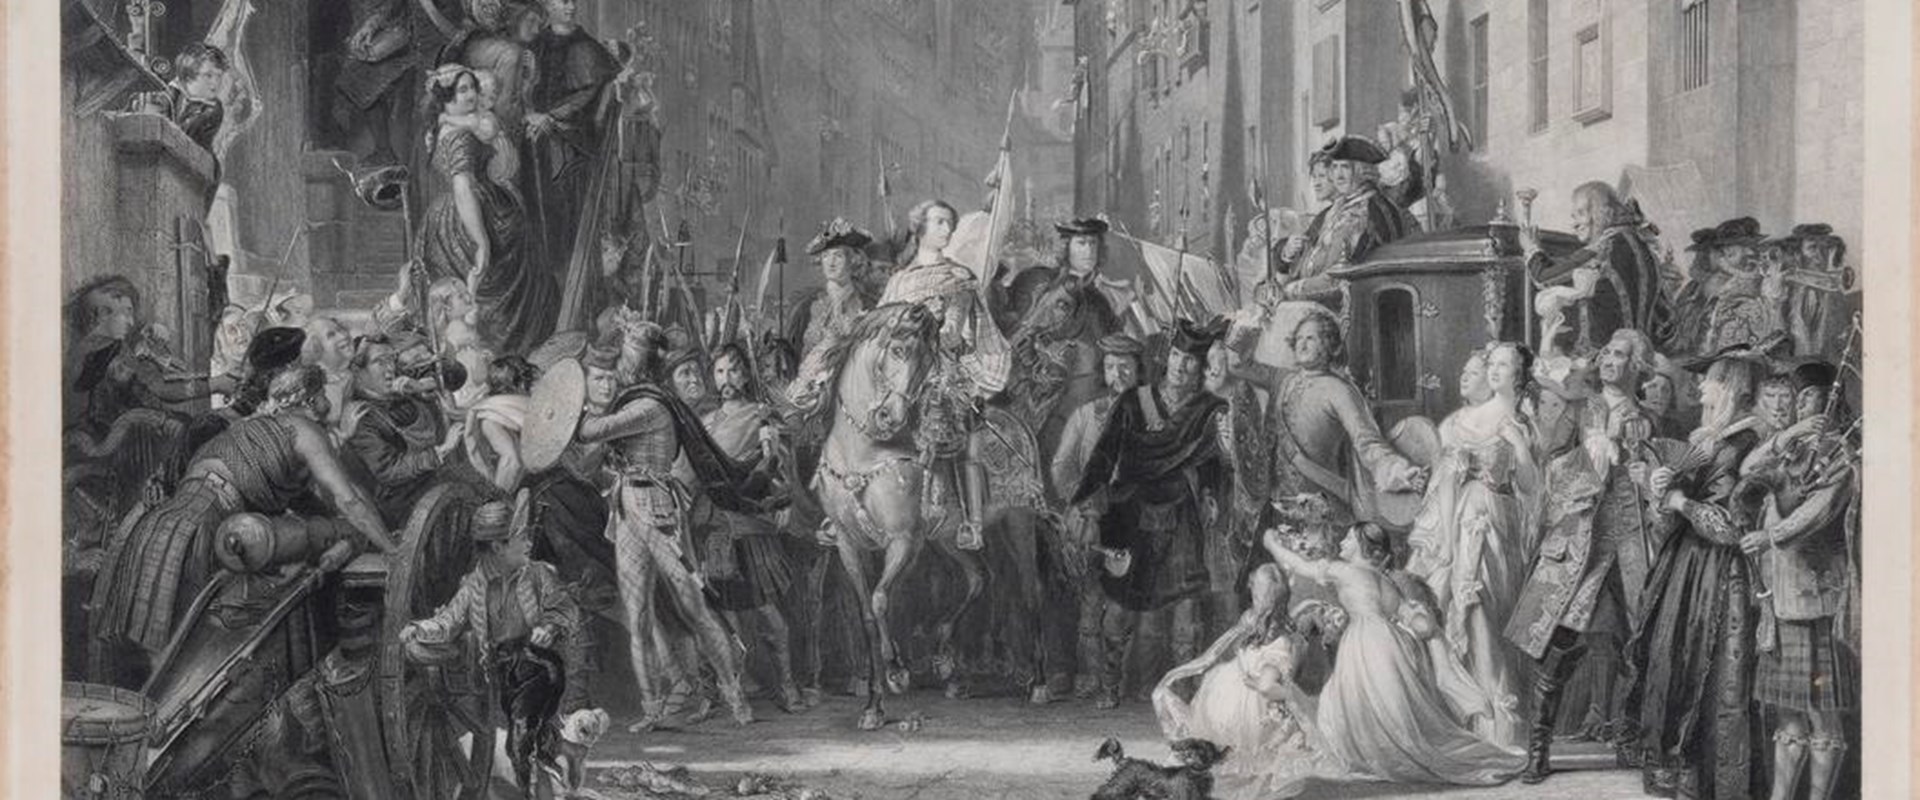 Black and white print of a crowd of people on a street surrounding Bonnie Prince Charlie who is riding a horse.